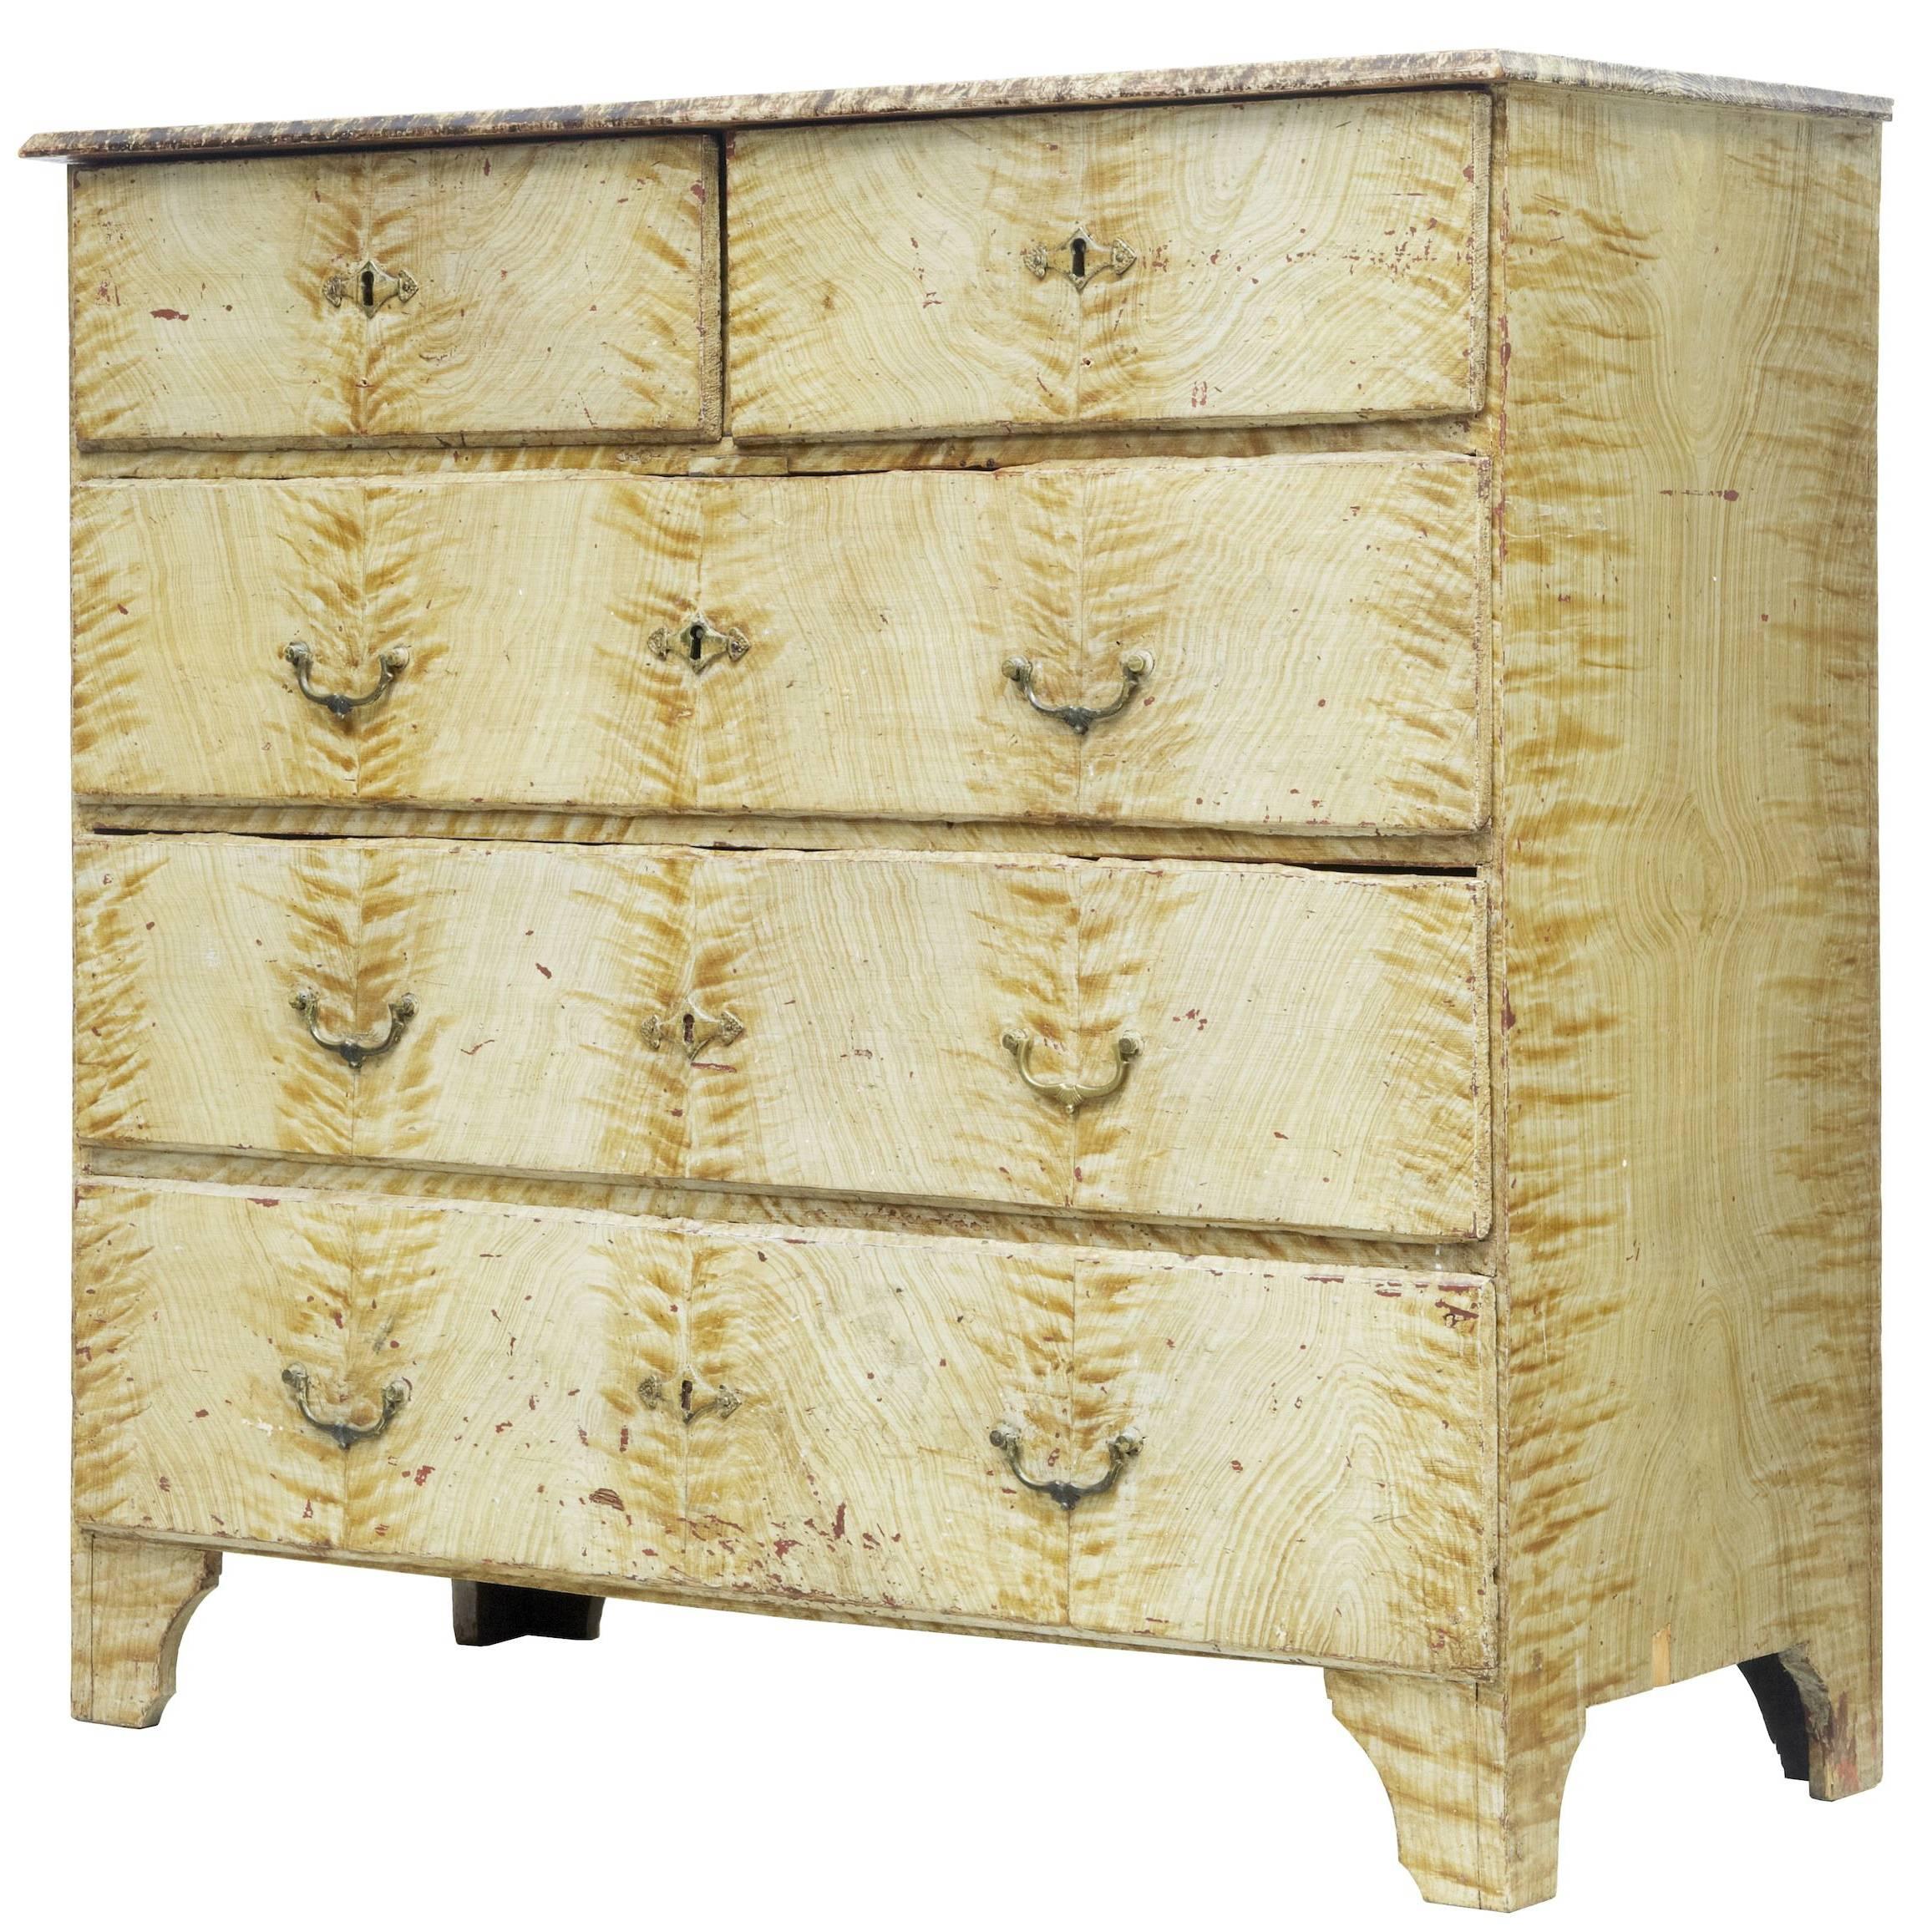 19th Century Swedish Painted Pine Chest of Drawers